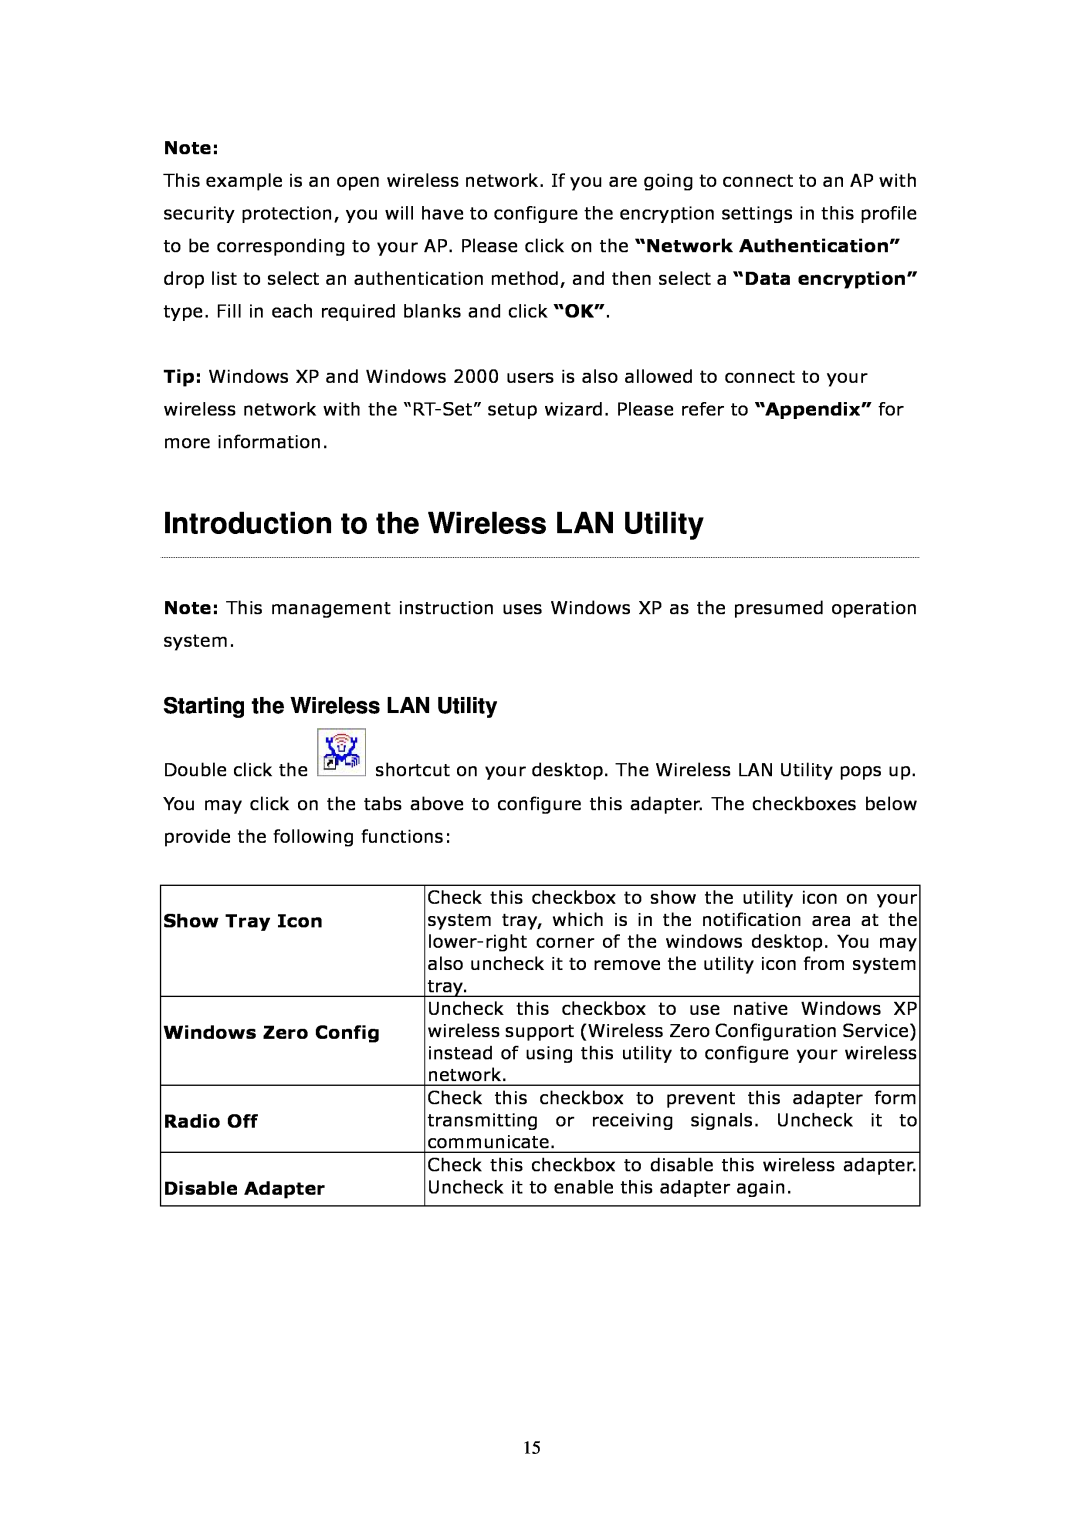 Billion Electric Company 3013G user manual Introduction to the Wireless LAN Utility, Starting the Wireless LAN Utility 